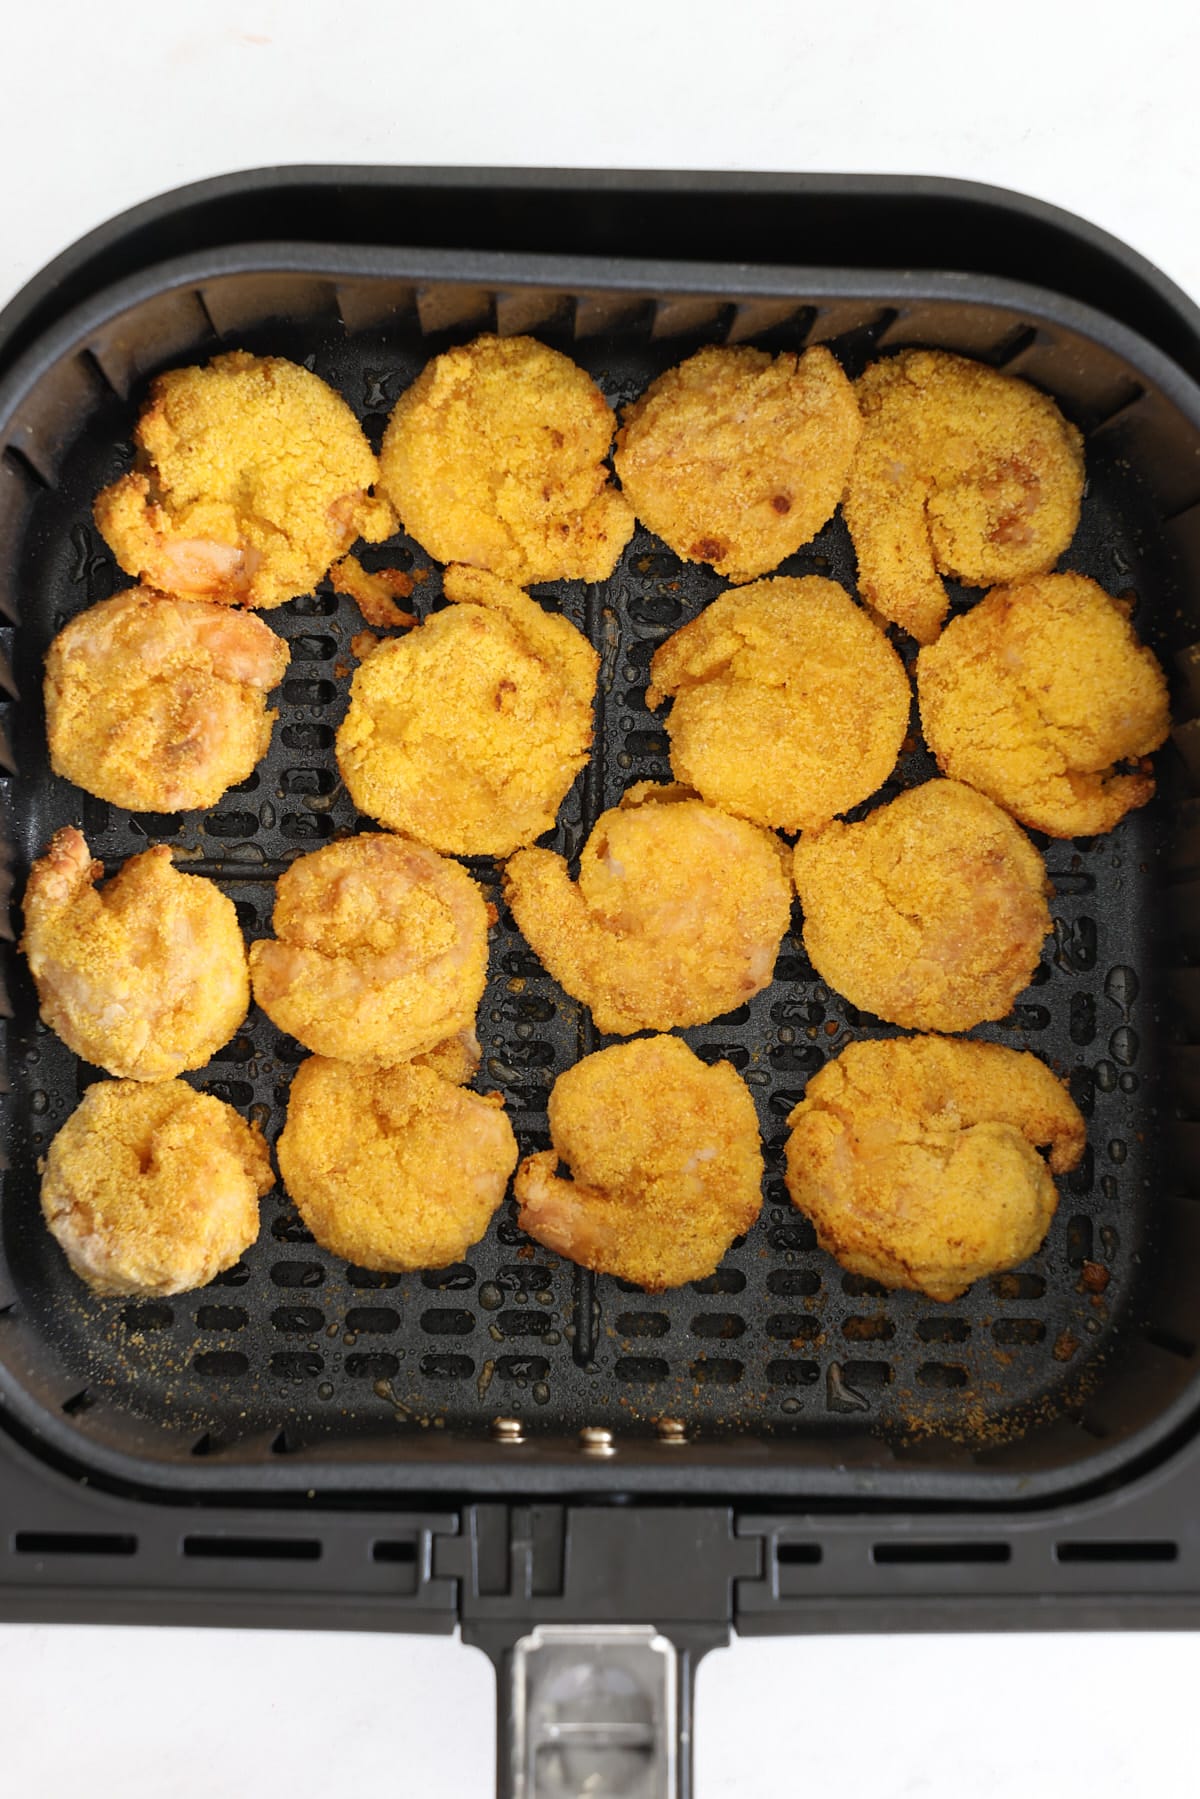 The air fried shrimp ready to put in the sandwich.